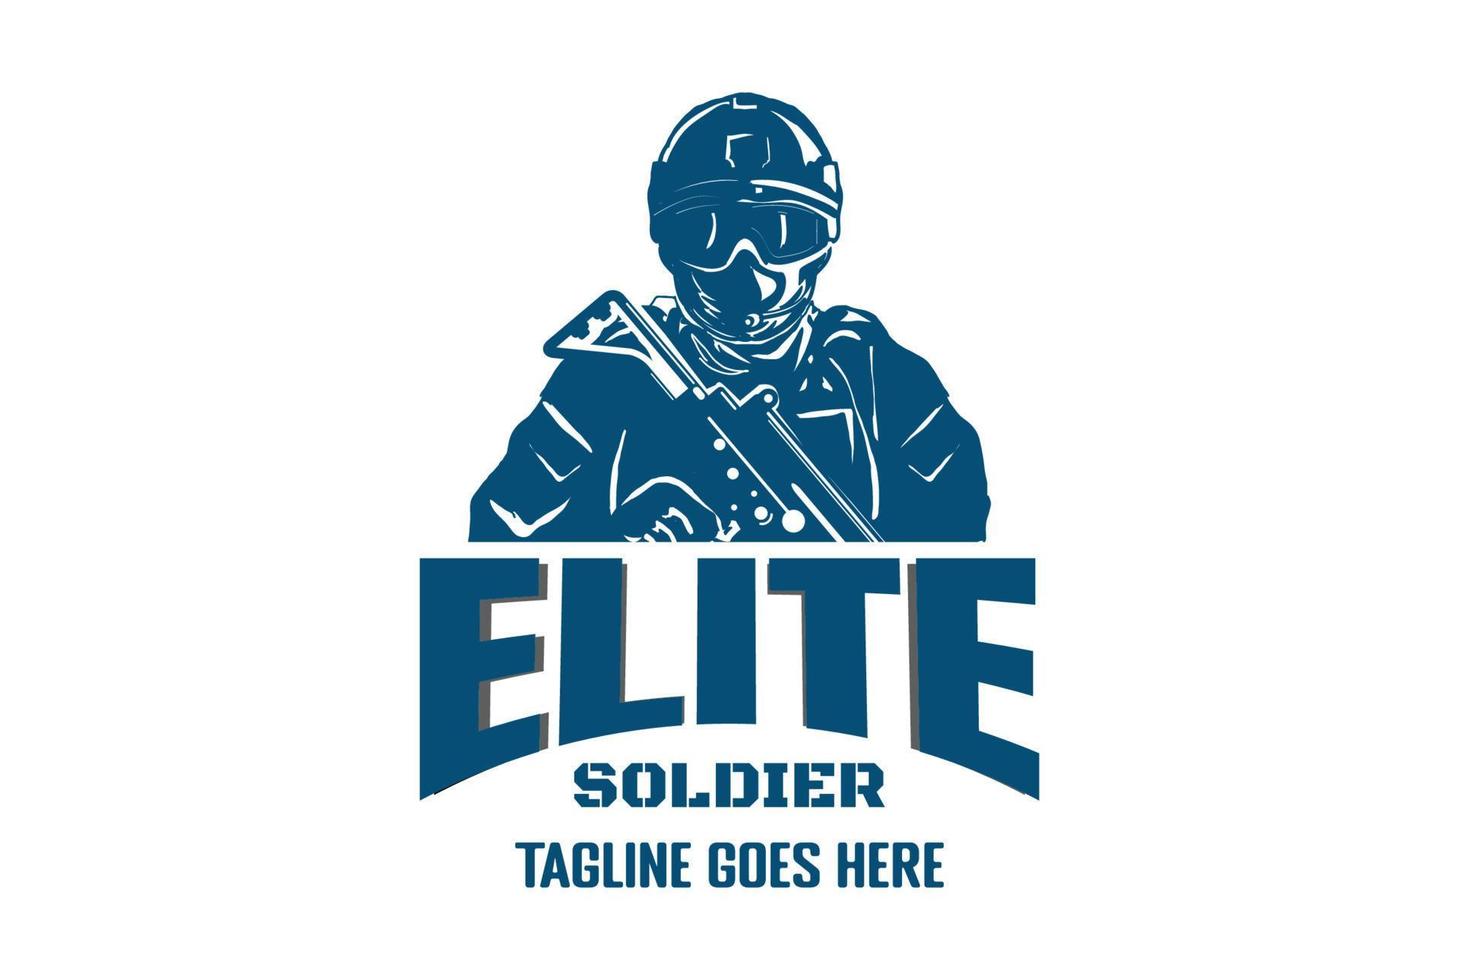 Vintage Elite Army Force Navy Soldier with Sub Machine Gun for Military Logo Design Vector